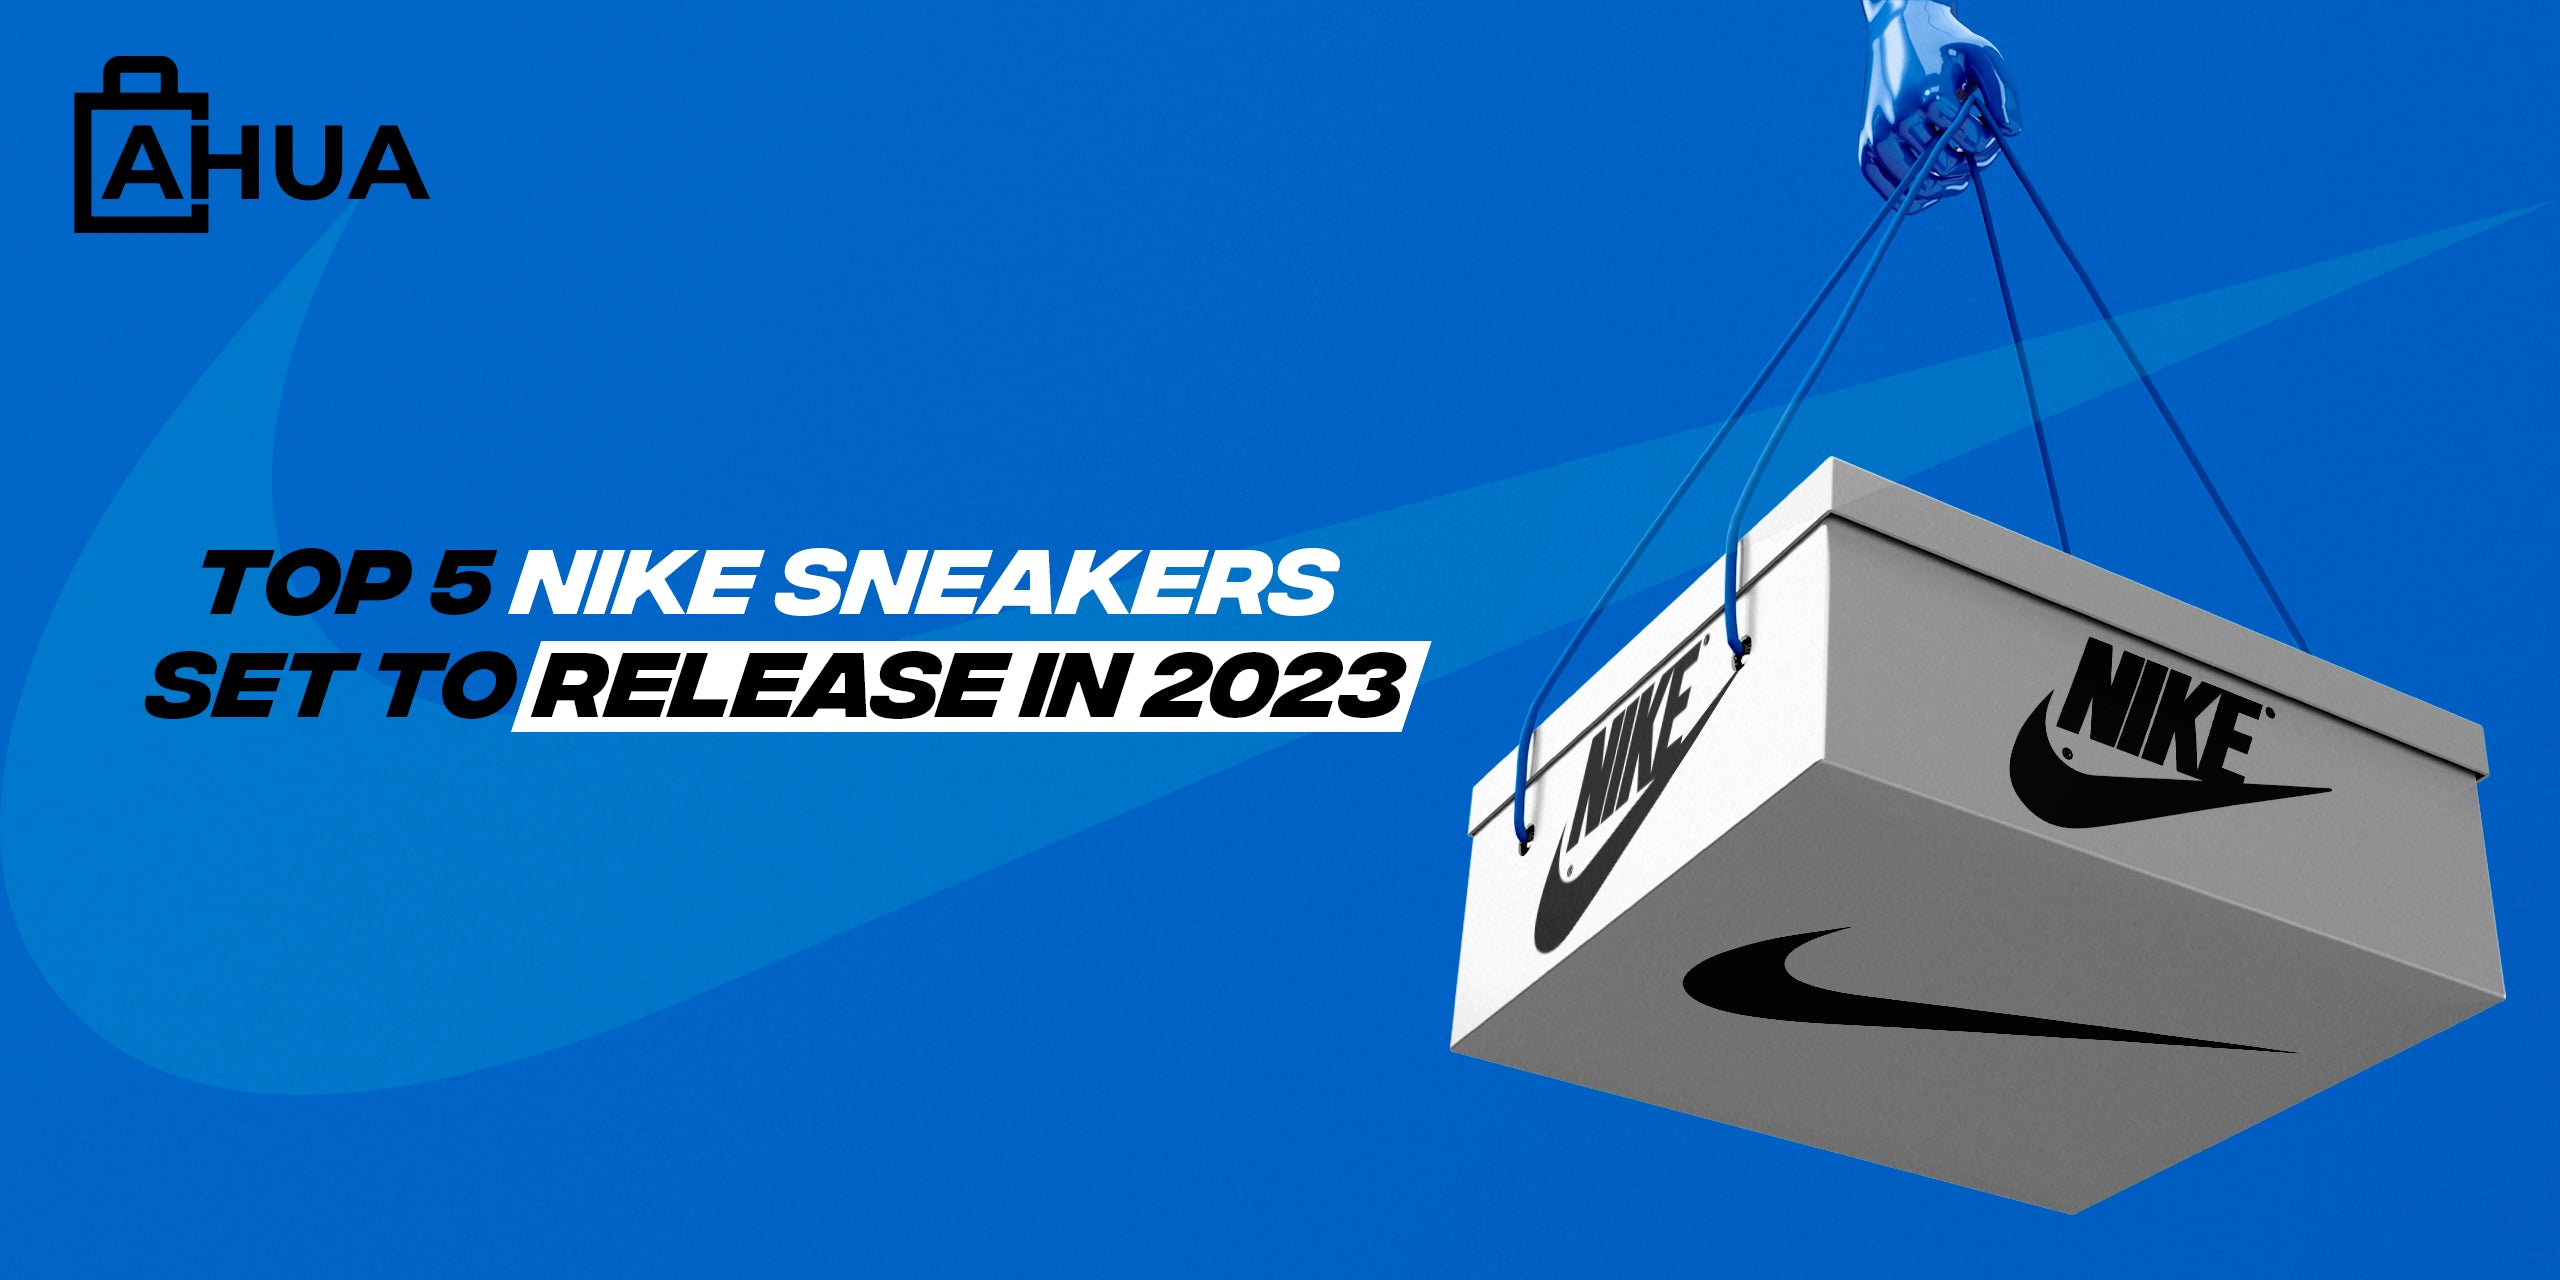 Top 5 Nike Sneakers set to release in 2023!